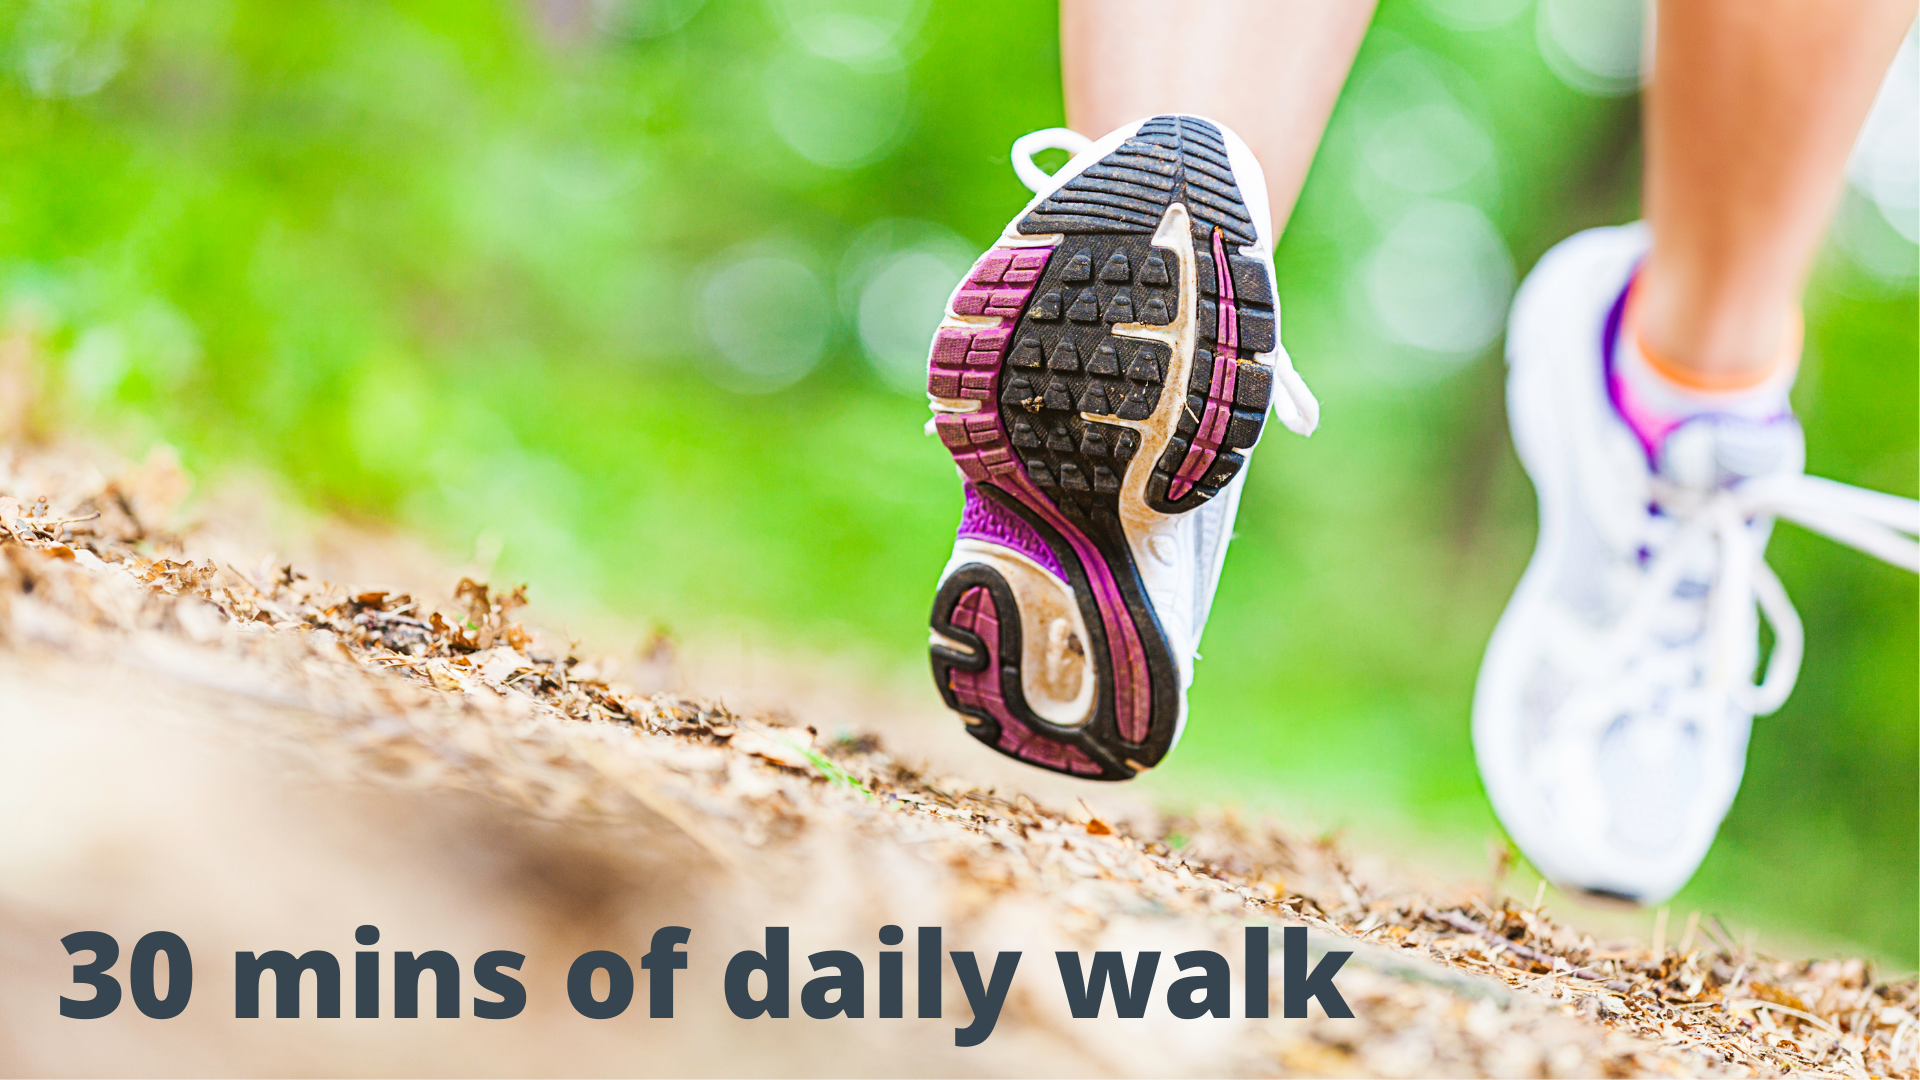 be more active by walking daily 